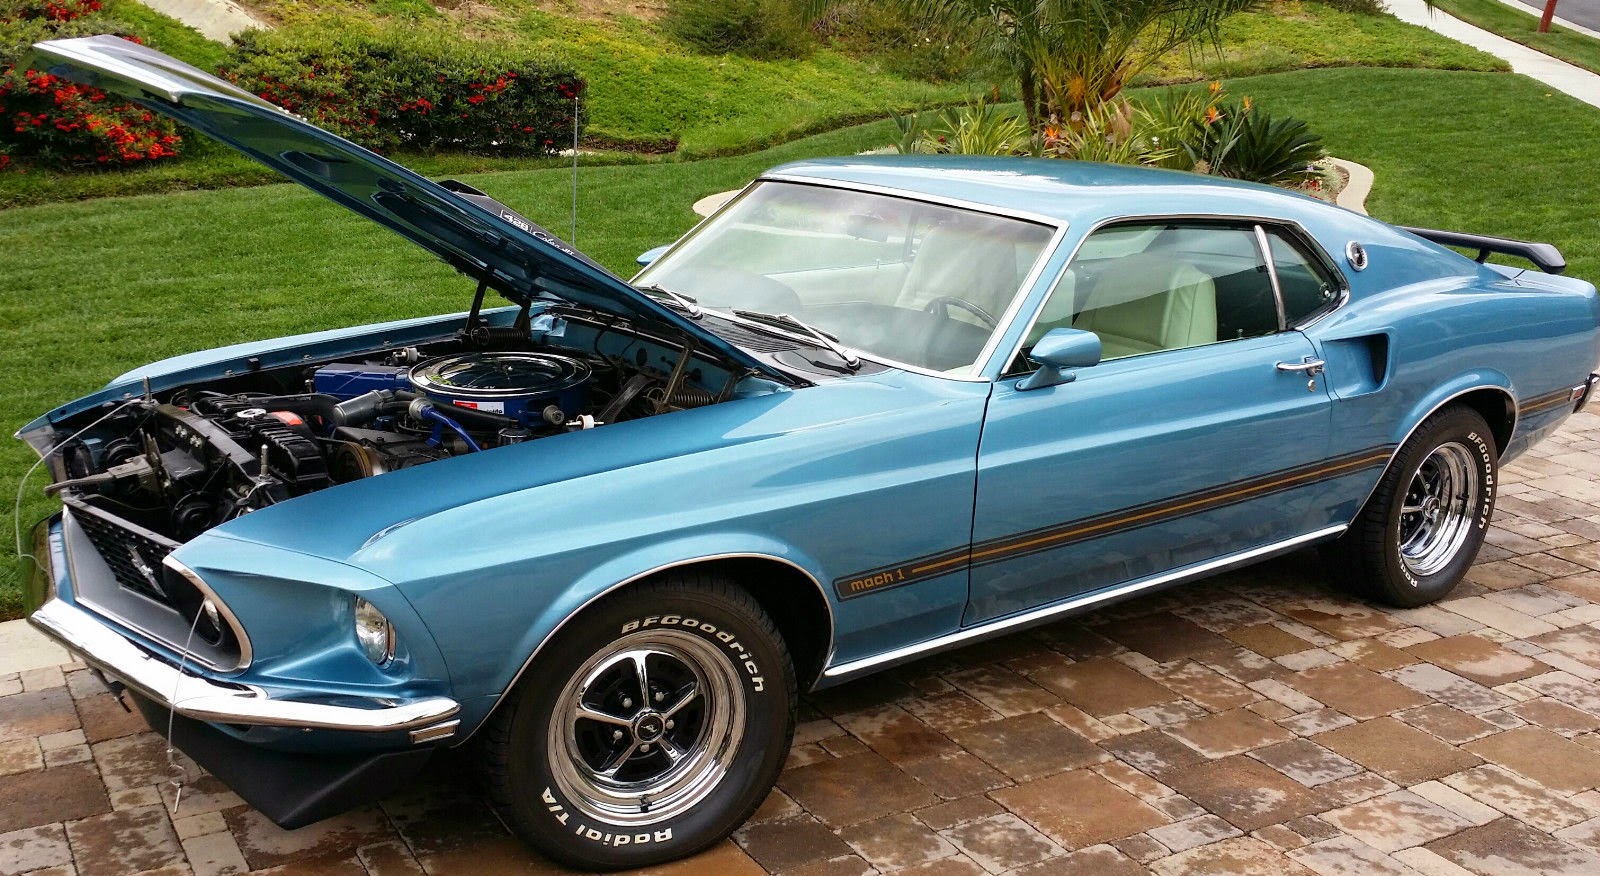 1969 Ford mustang mach 1 for sale uk #6